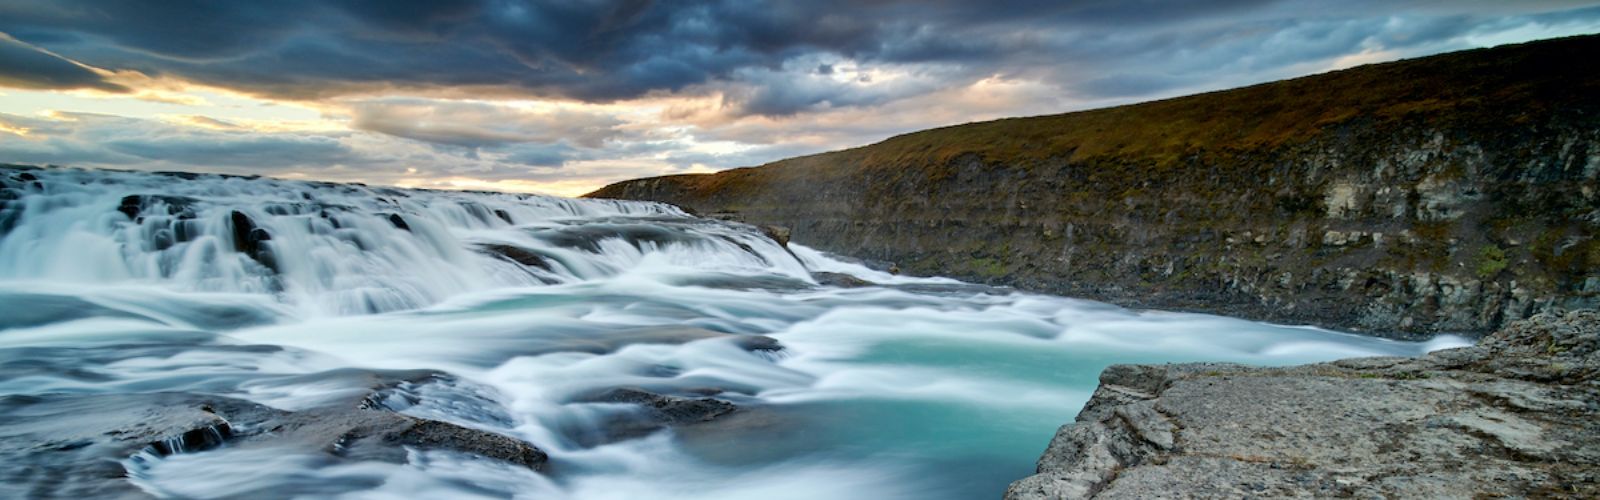 6 Best Landscape Photography Workshops in the World